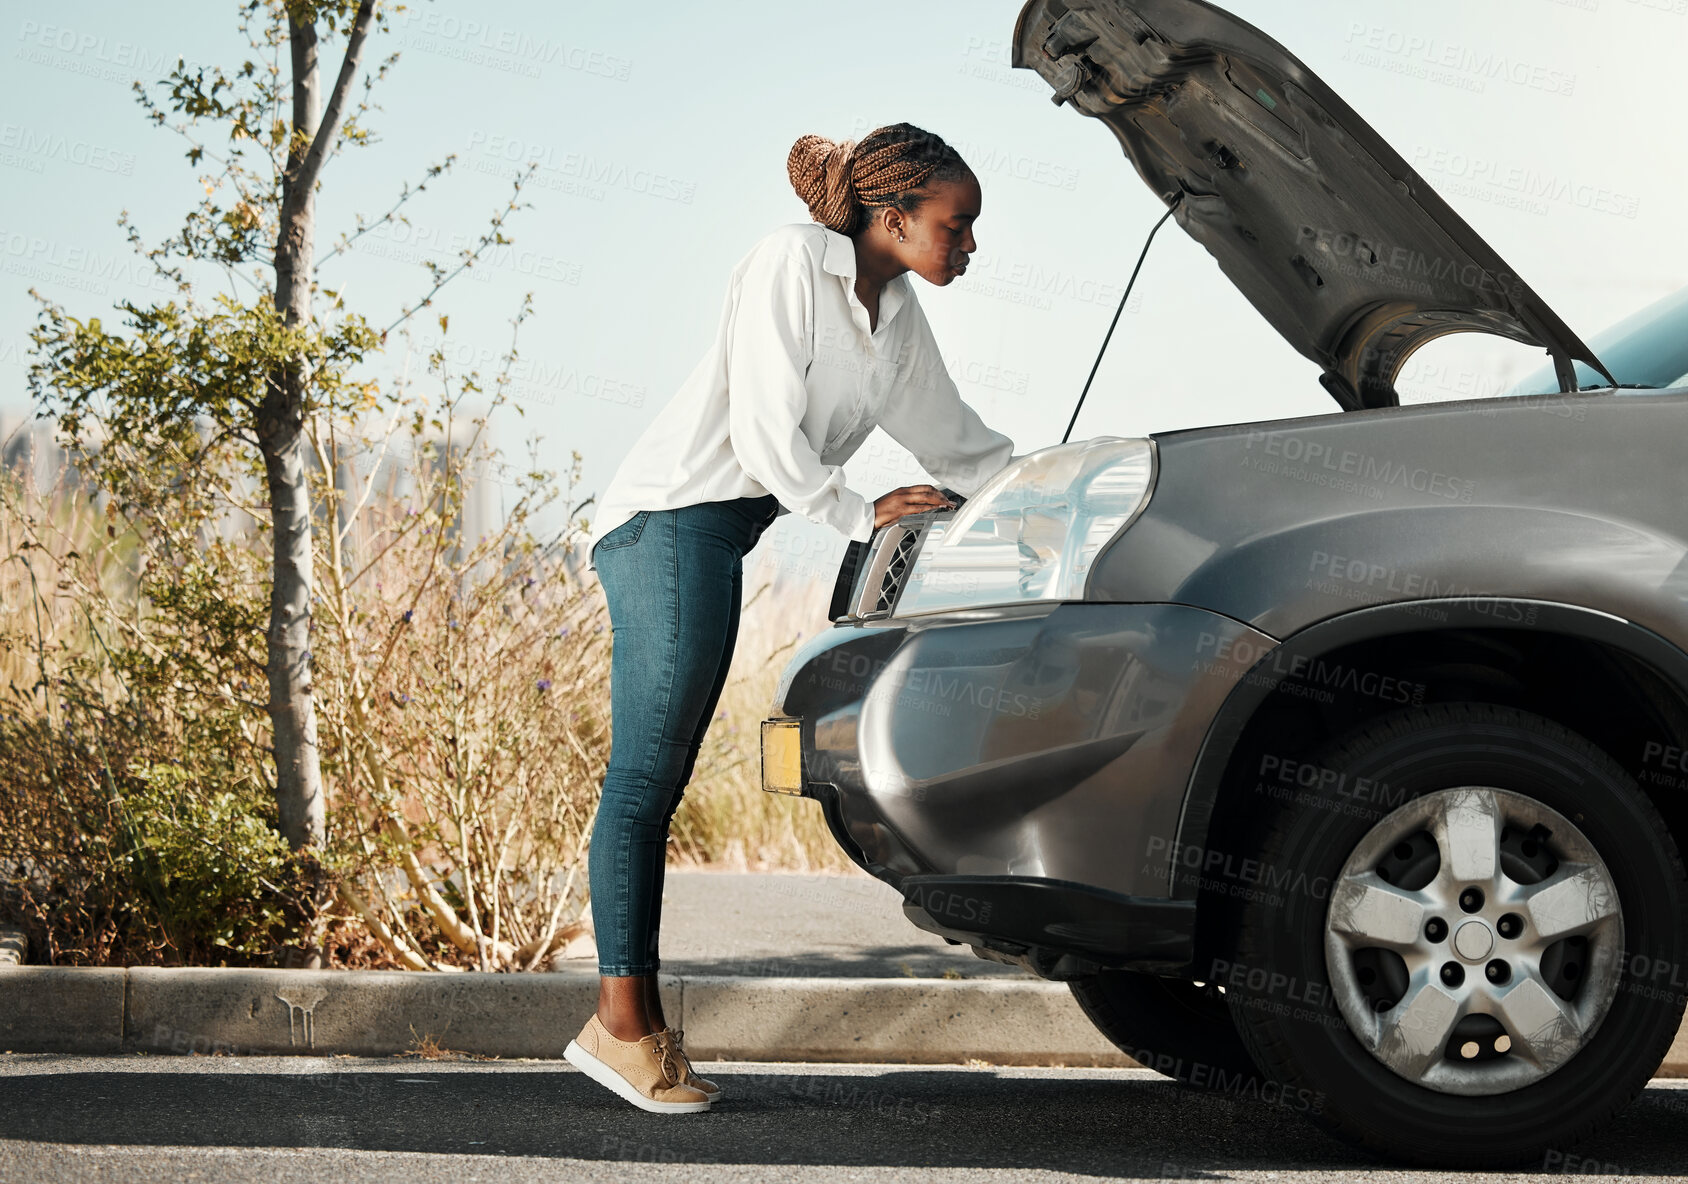 Buy stock photo Mechanic, broken car and black woman in the road fixing her engine problem or emergency. Transportation, travel and young African female person checking her motor vehicle for accident in the street.